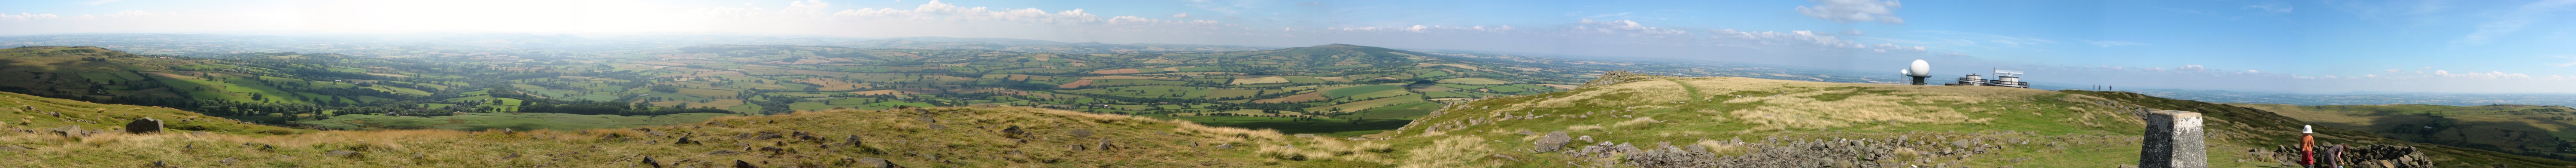 Clee hill